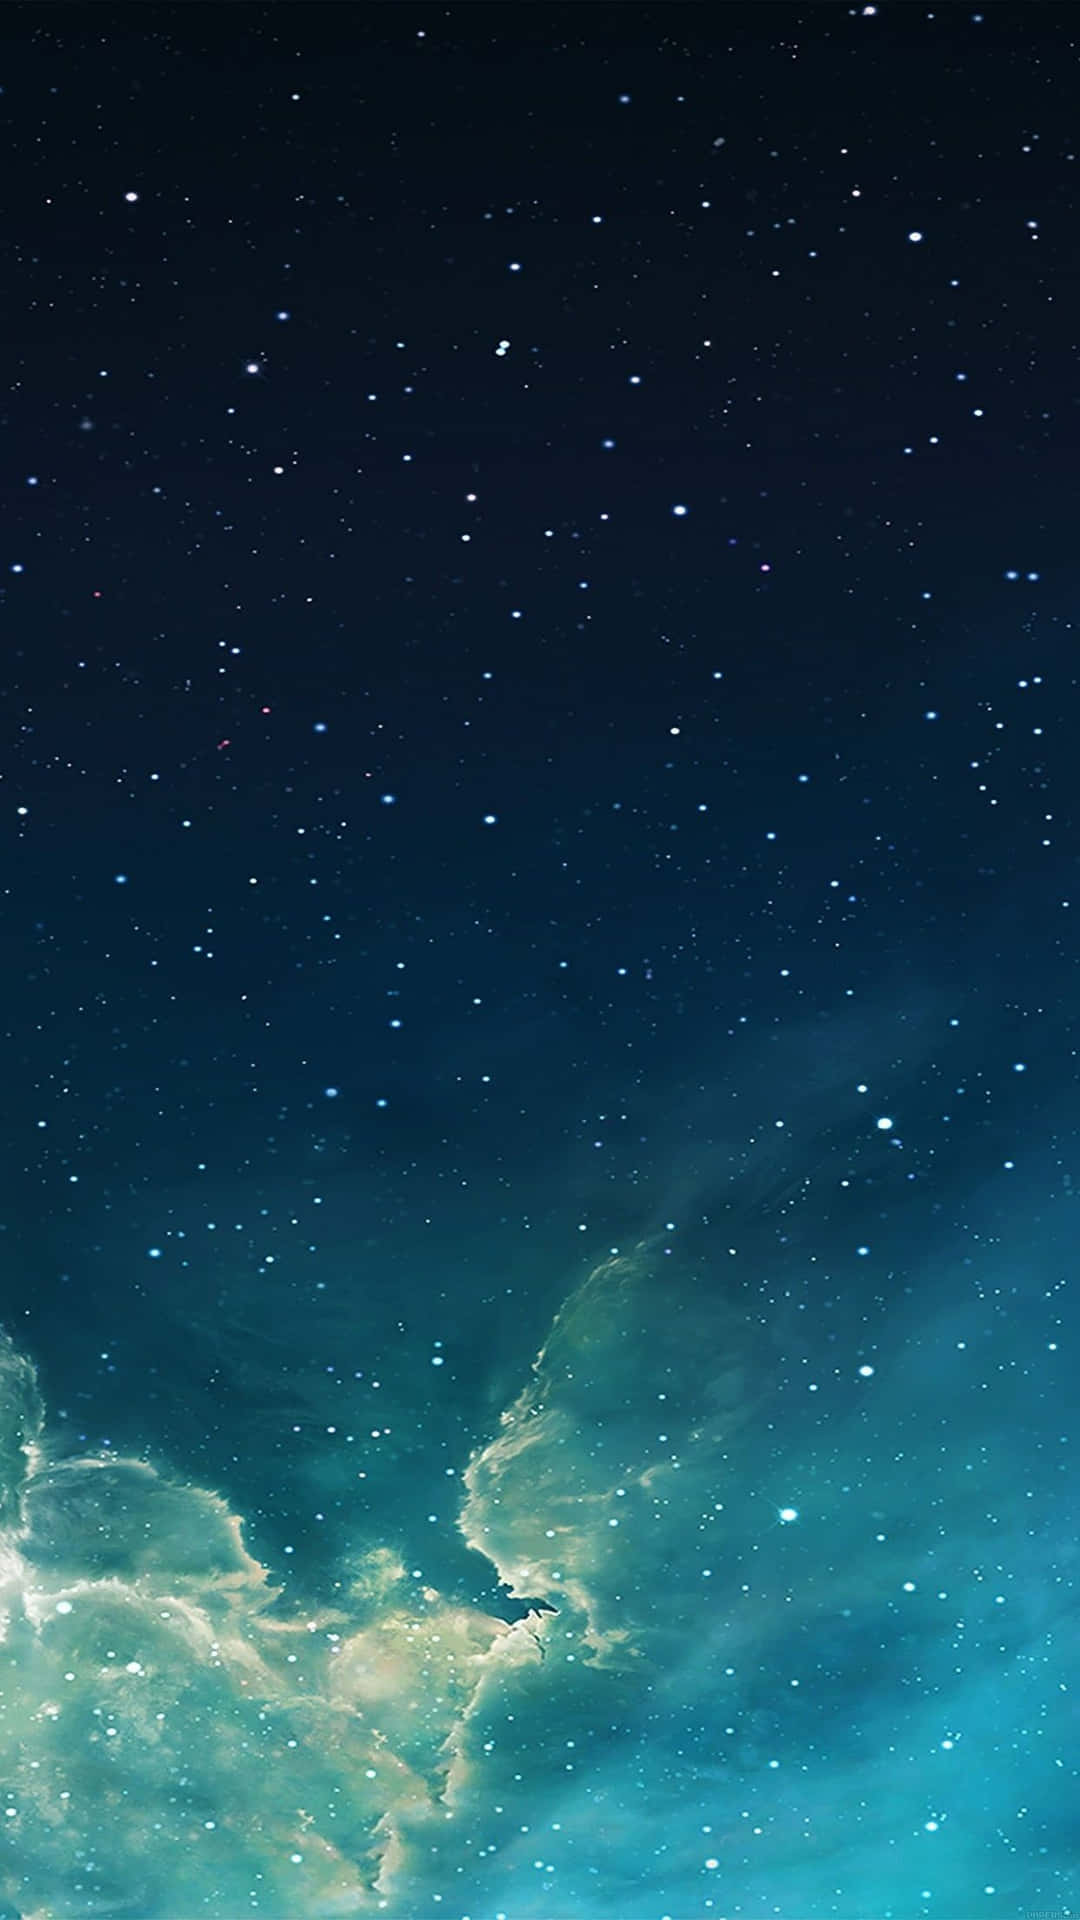 A Blue Sky With Stars And Clouds Wallpaper